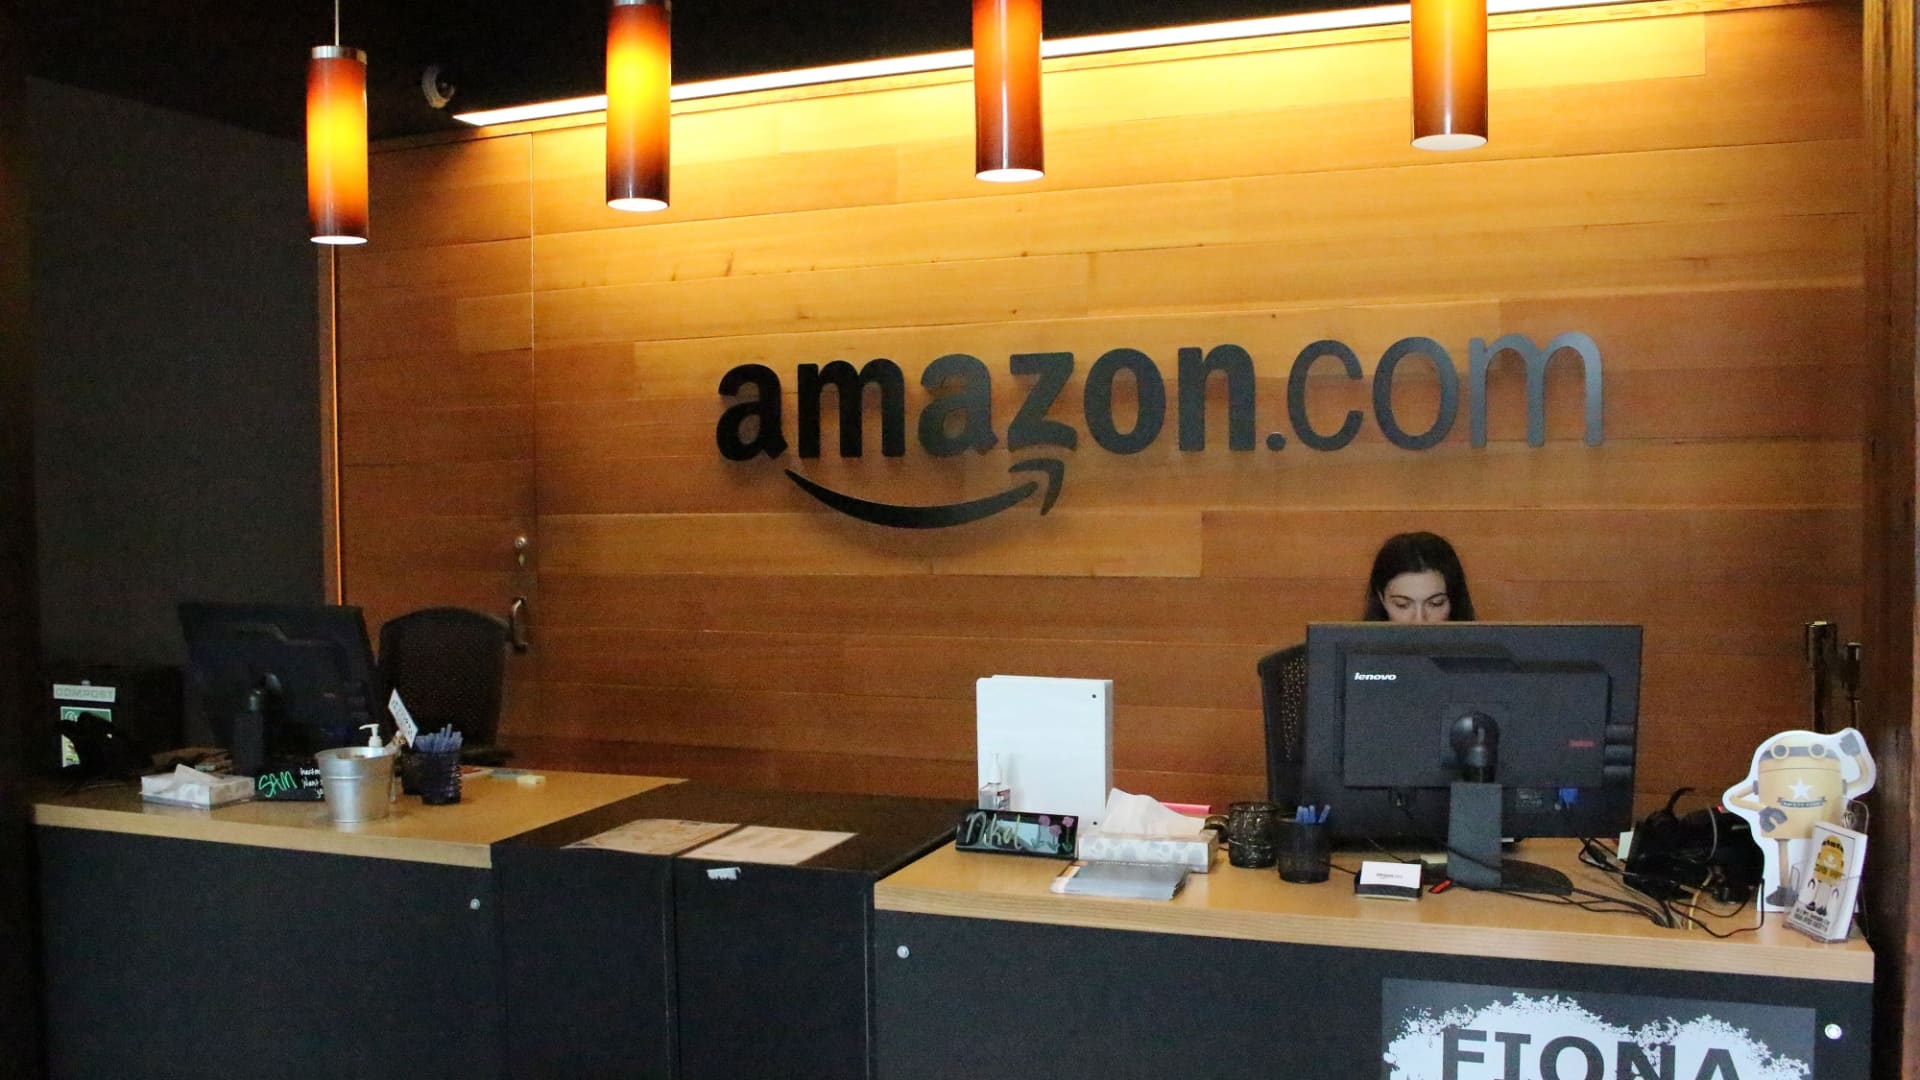 Amazon crosses 1,000 hires at its new Nashville office